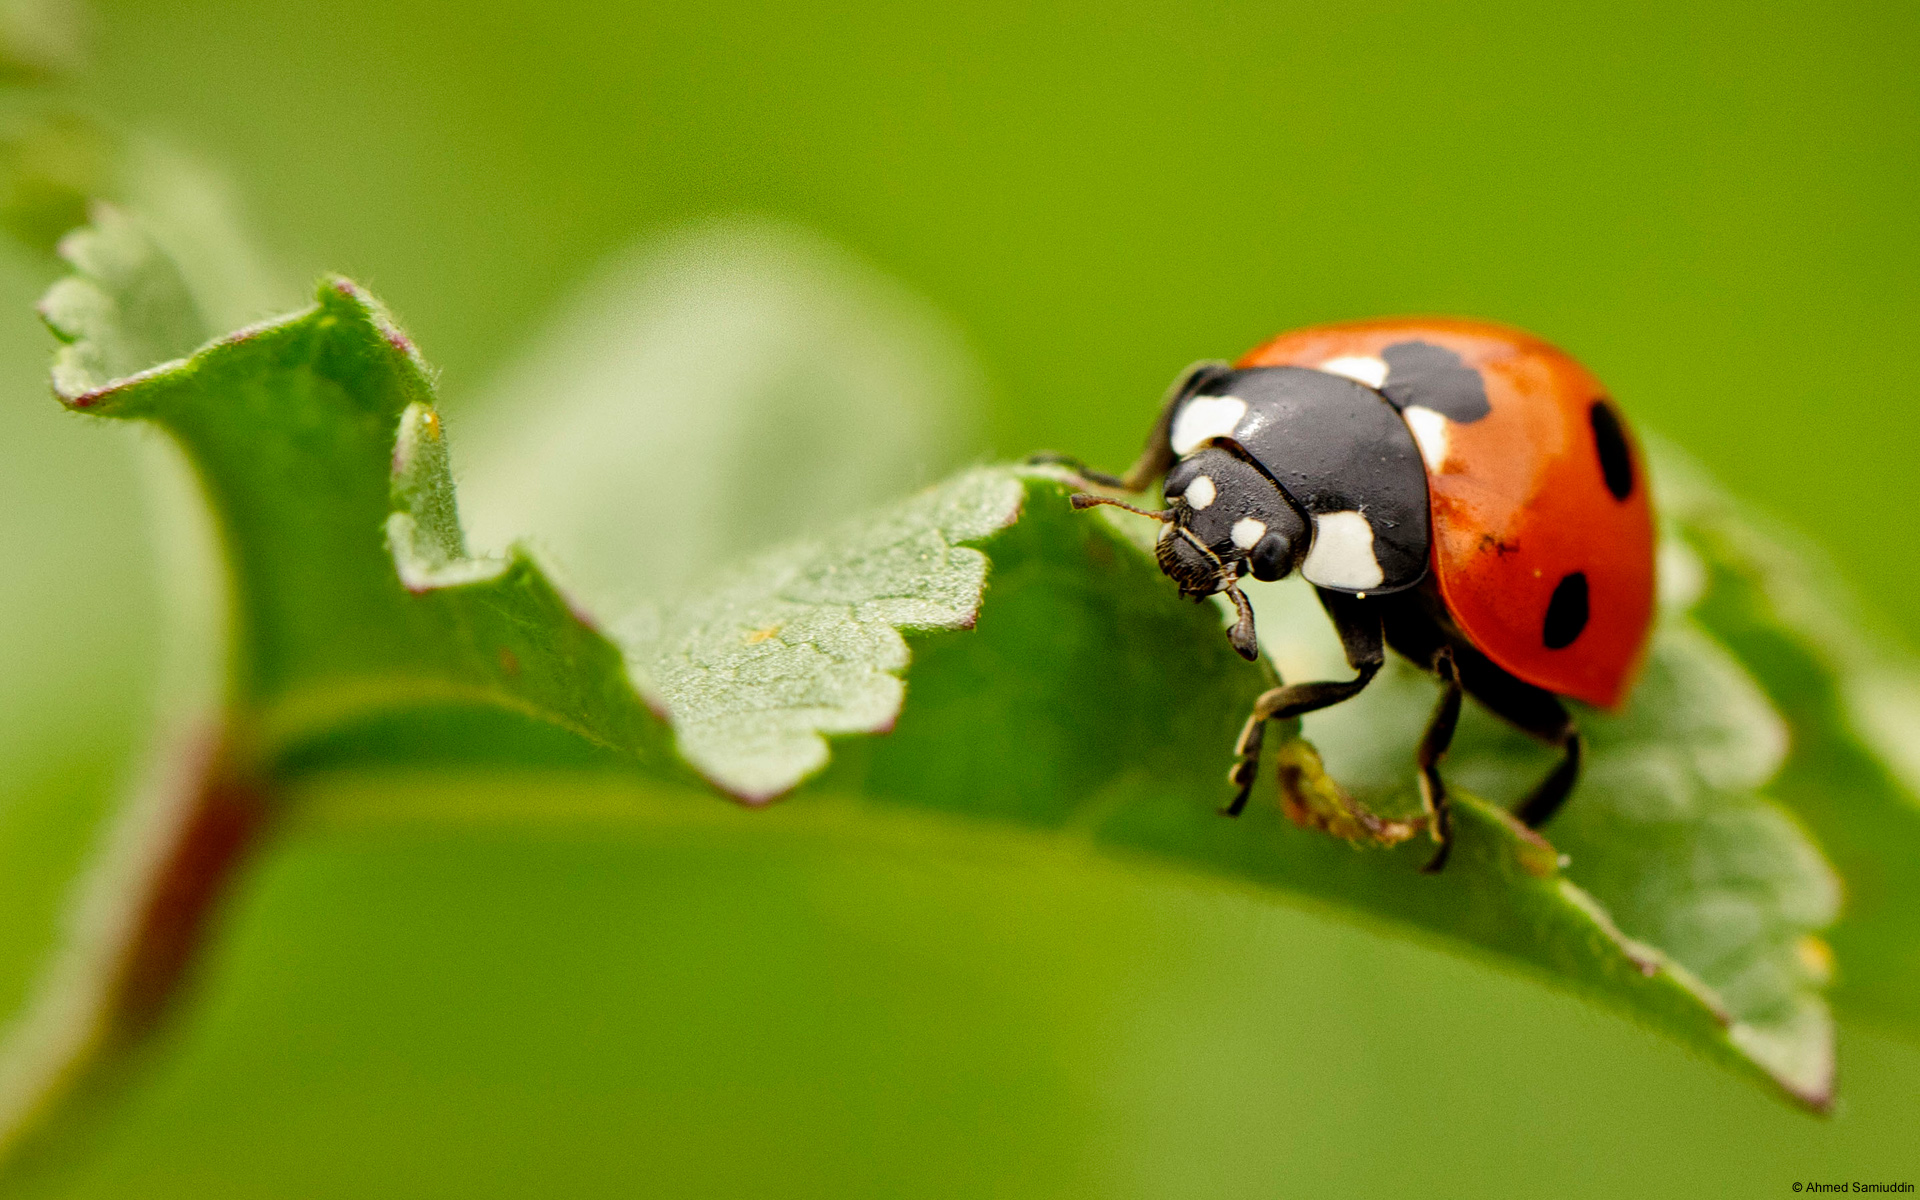 Wallpaper And More Like This Image Of A Bright Red Ladybug